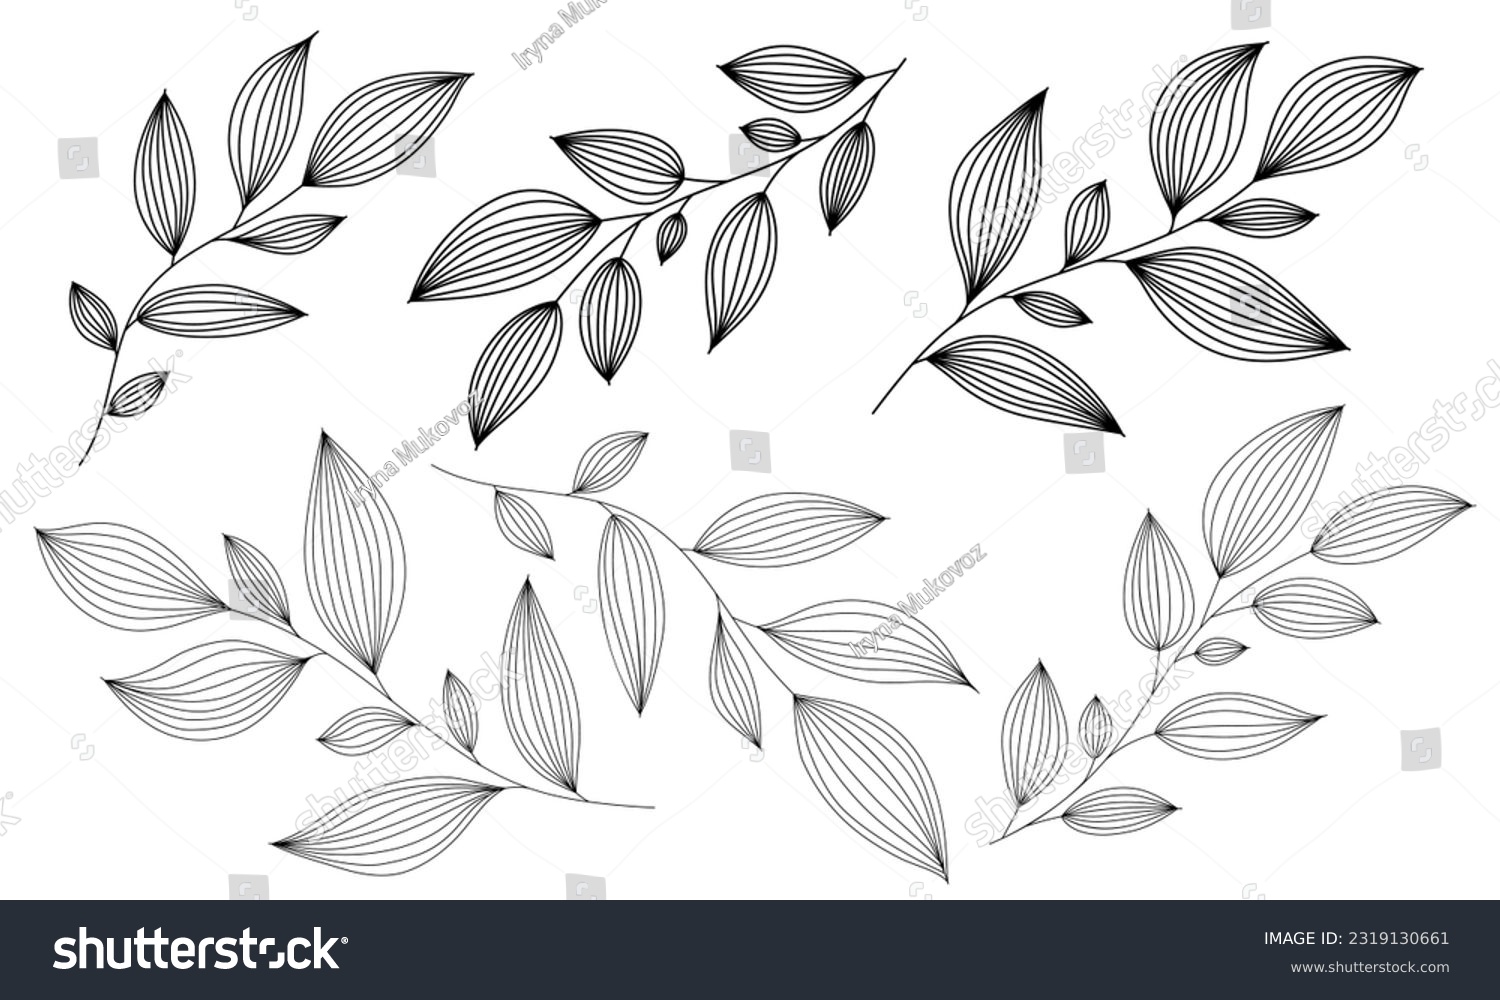 SVG of Outline branches with leaves. Contour thin leaf. Botanical set of hand drawn design elements svg